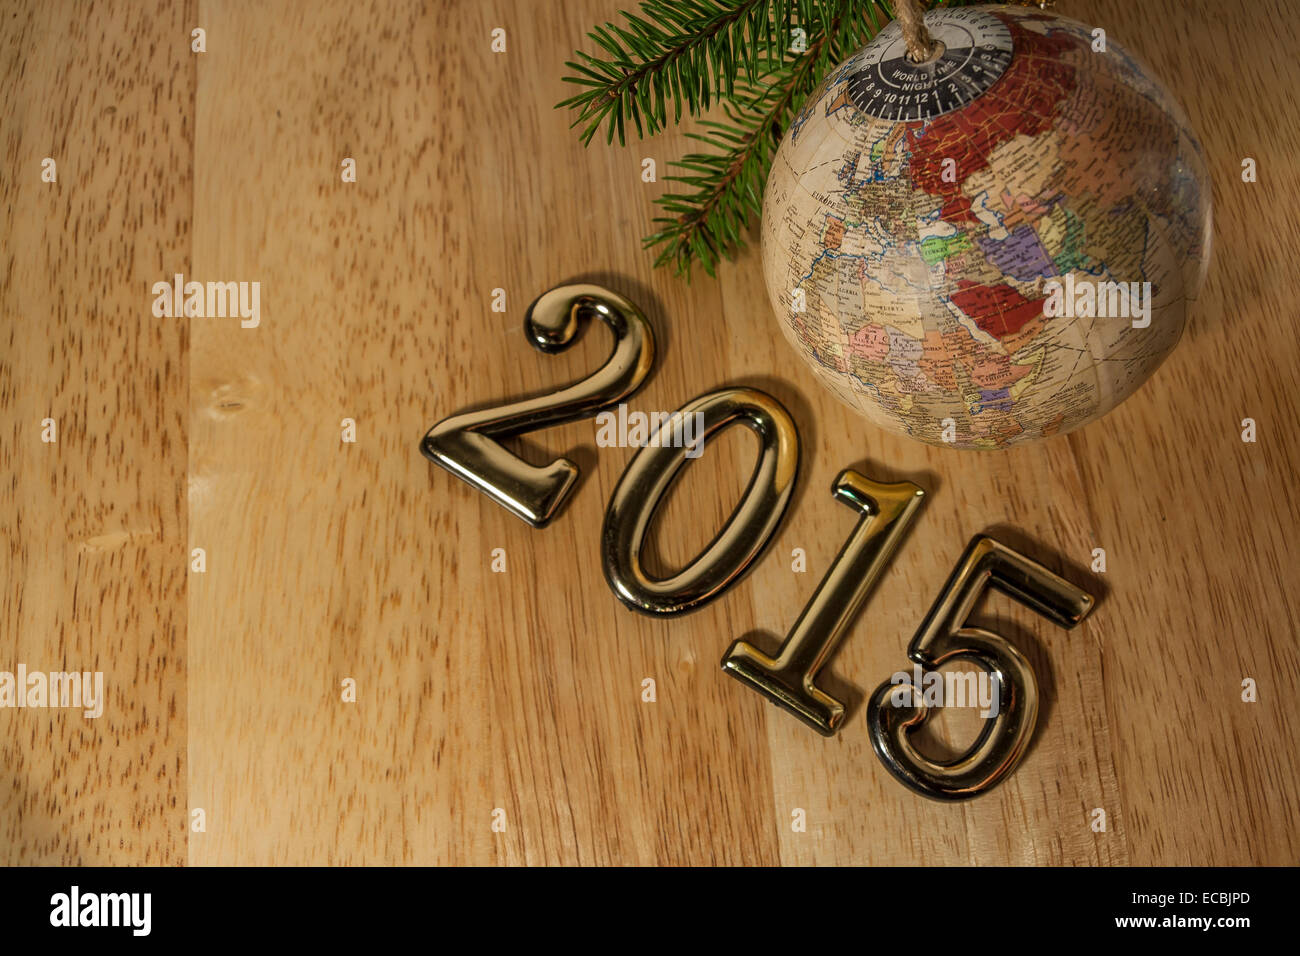 2015 New year text and Christmas Bauble Stock Photo